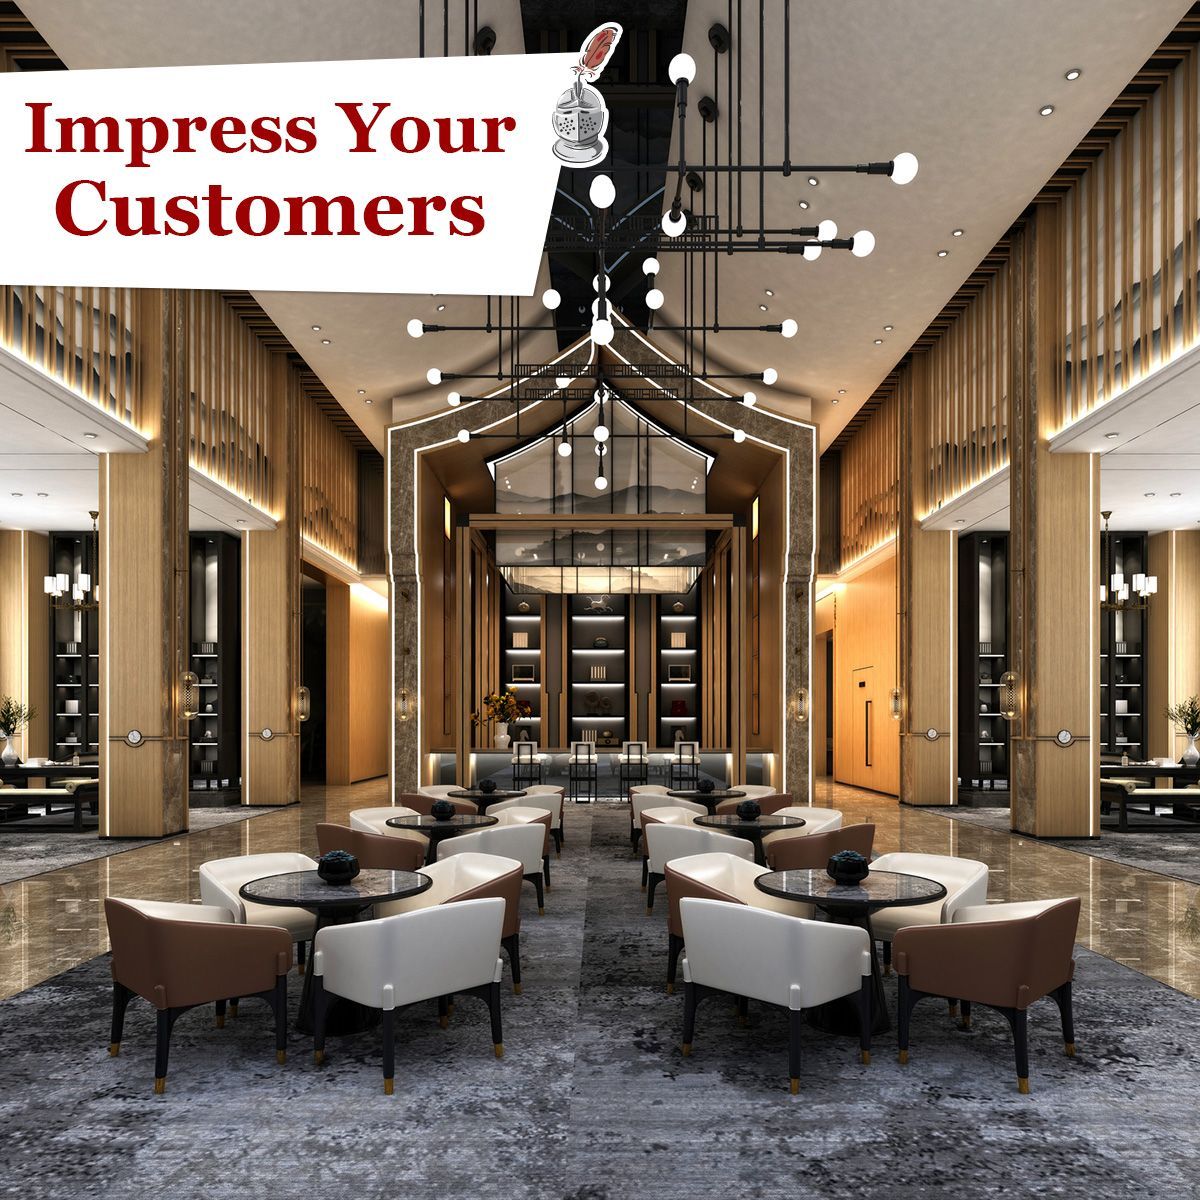 Impress Your Customers